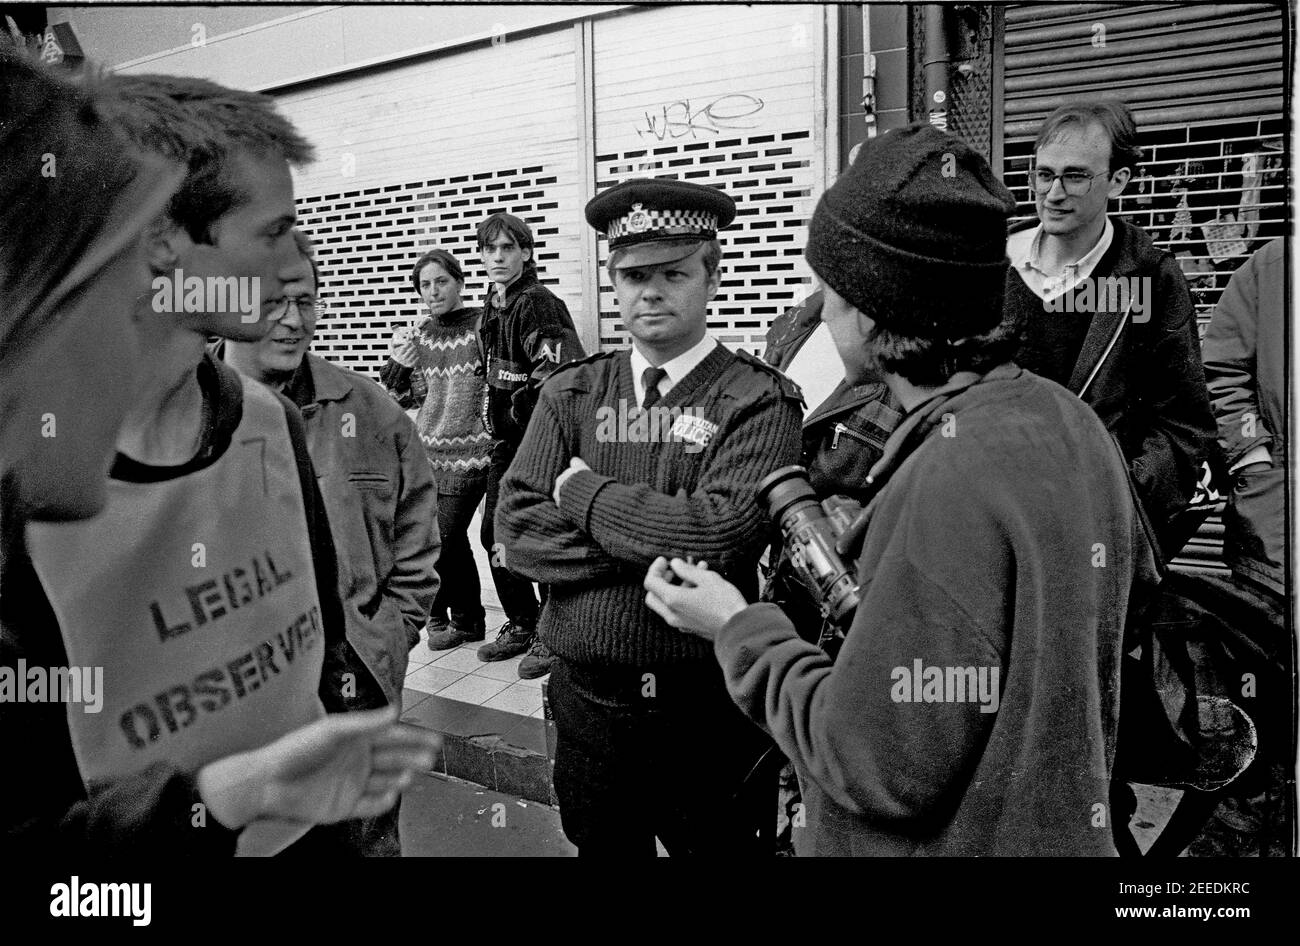 Police offiers being filmed by a video activist from Undercurrents network at the Camden High Street Reclaim The Streets anti car protest, London, 14th May 1995 Stock Photo